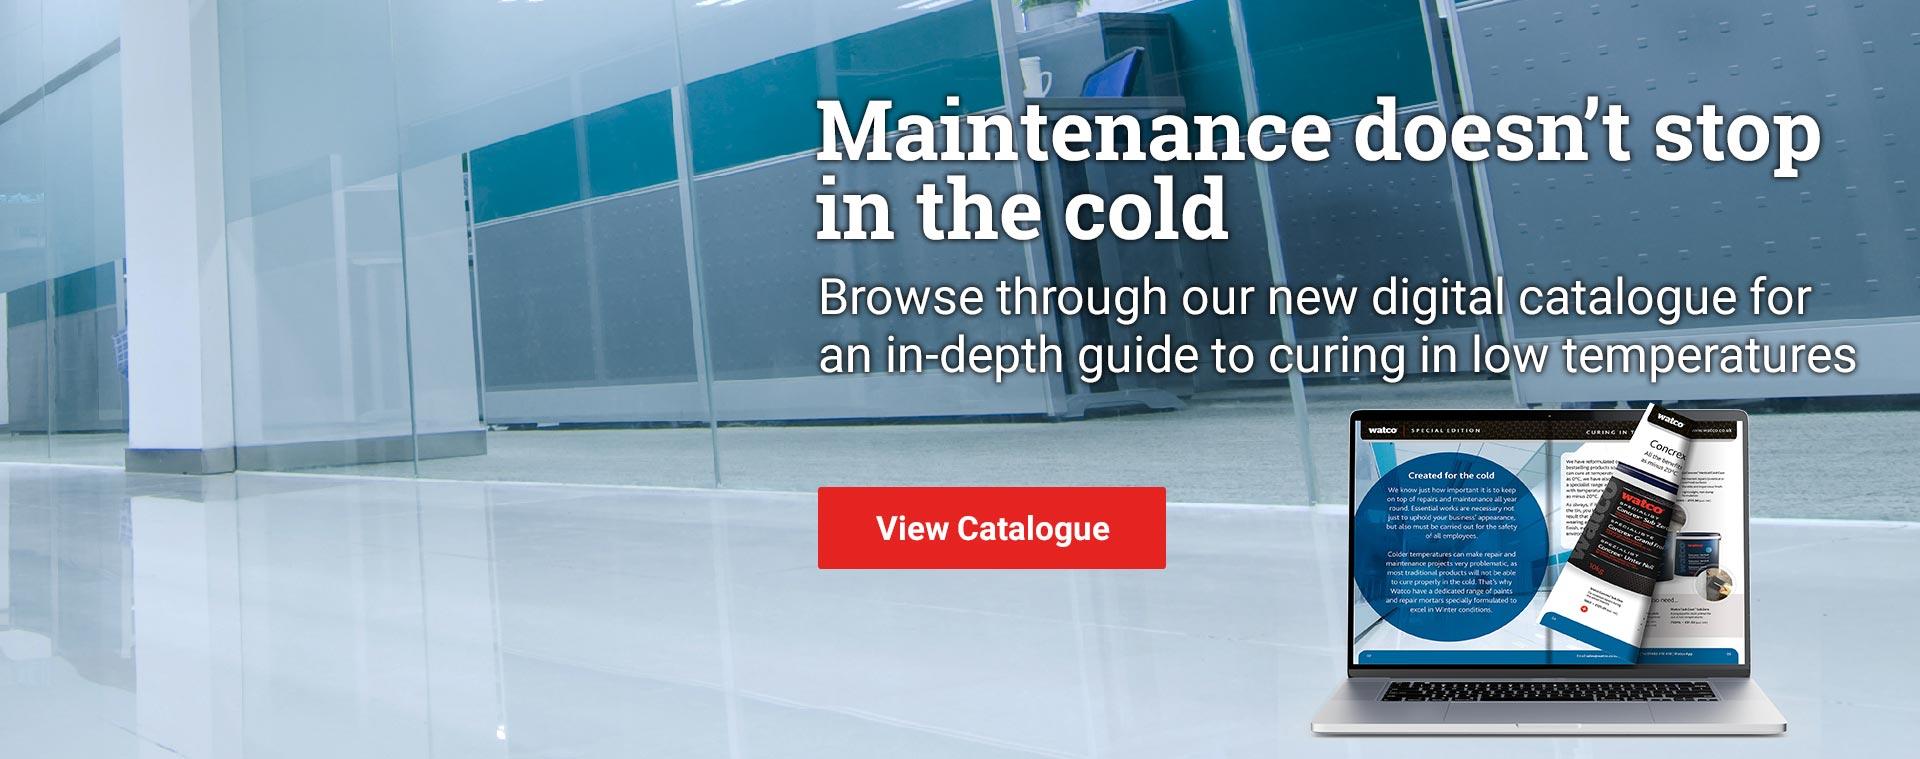 Maintenance Doesn't Stop in the Cold - Digital Catalogue